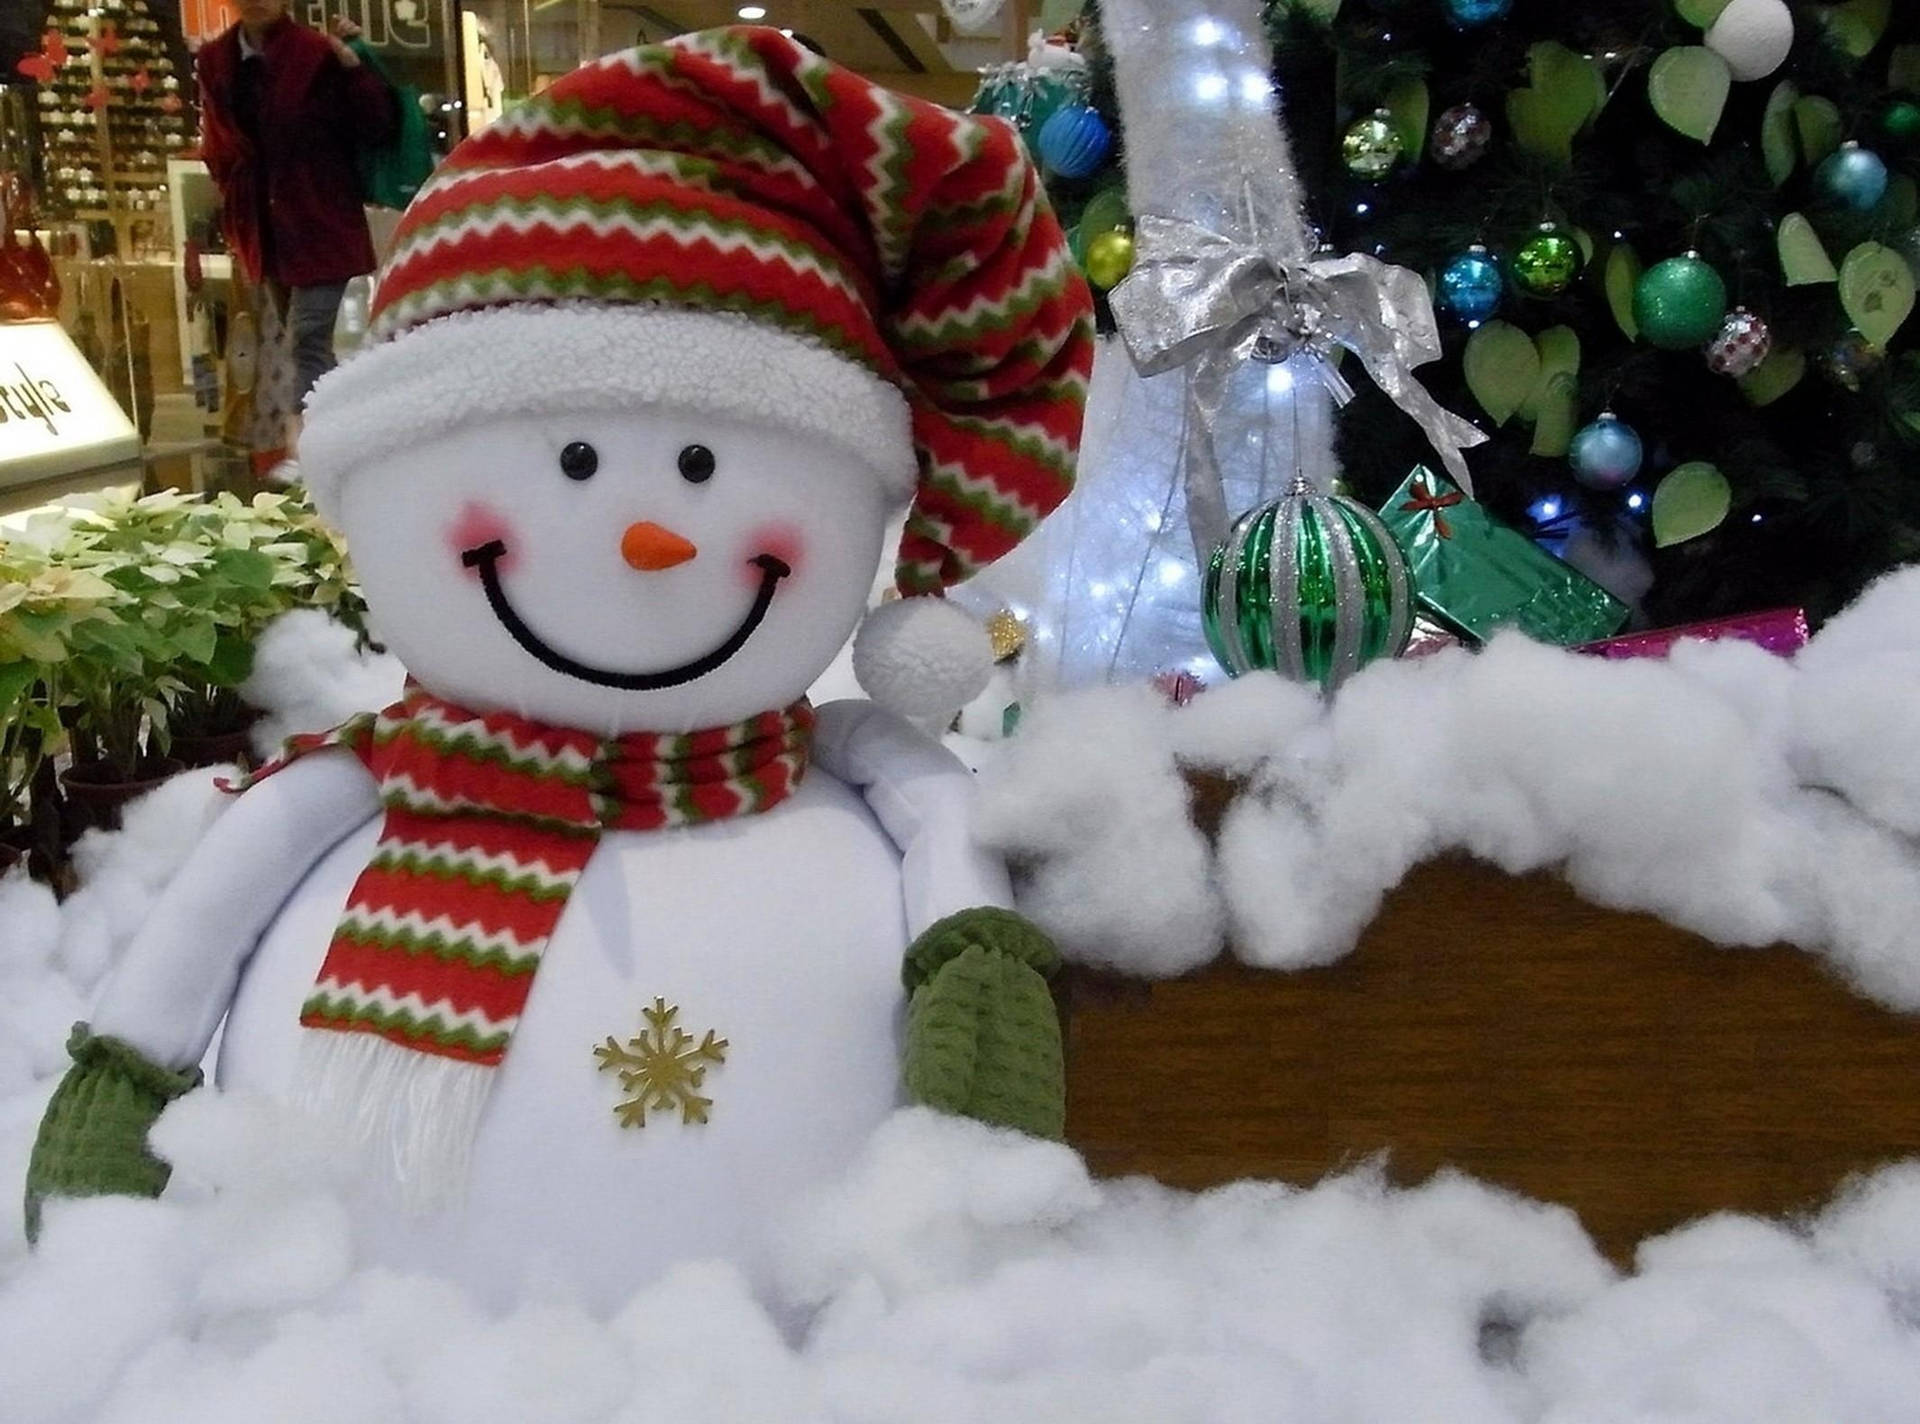 Smiling Snowman Toy Background